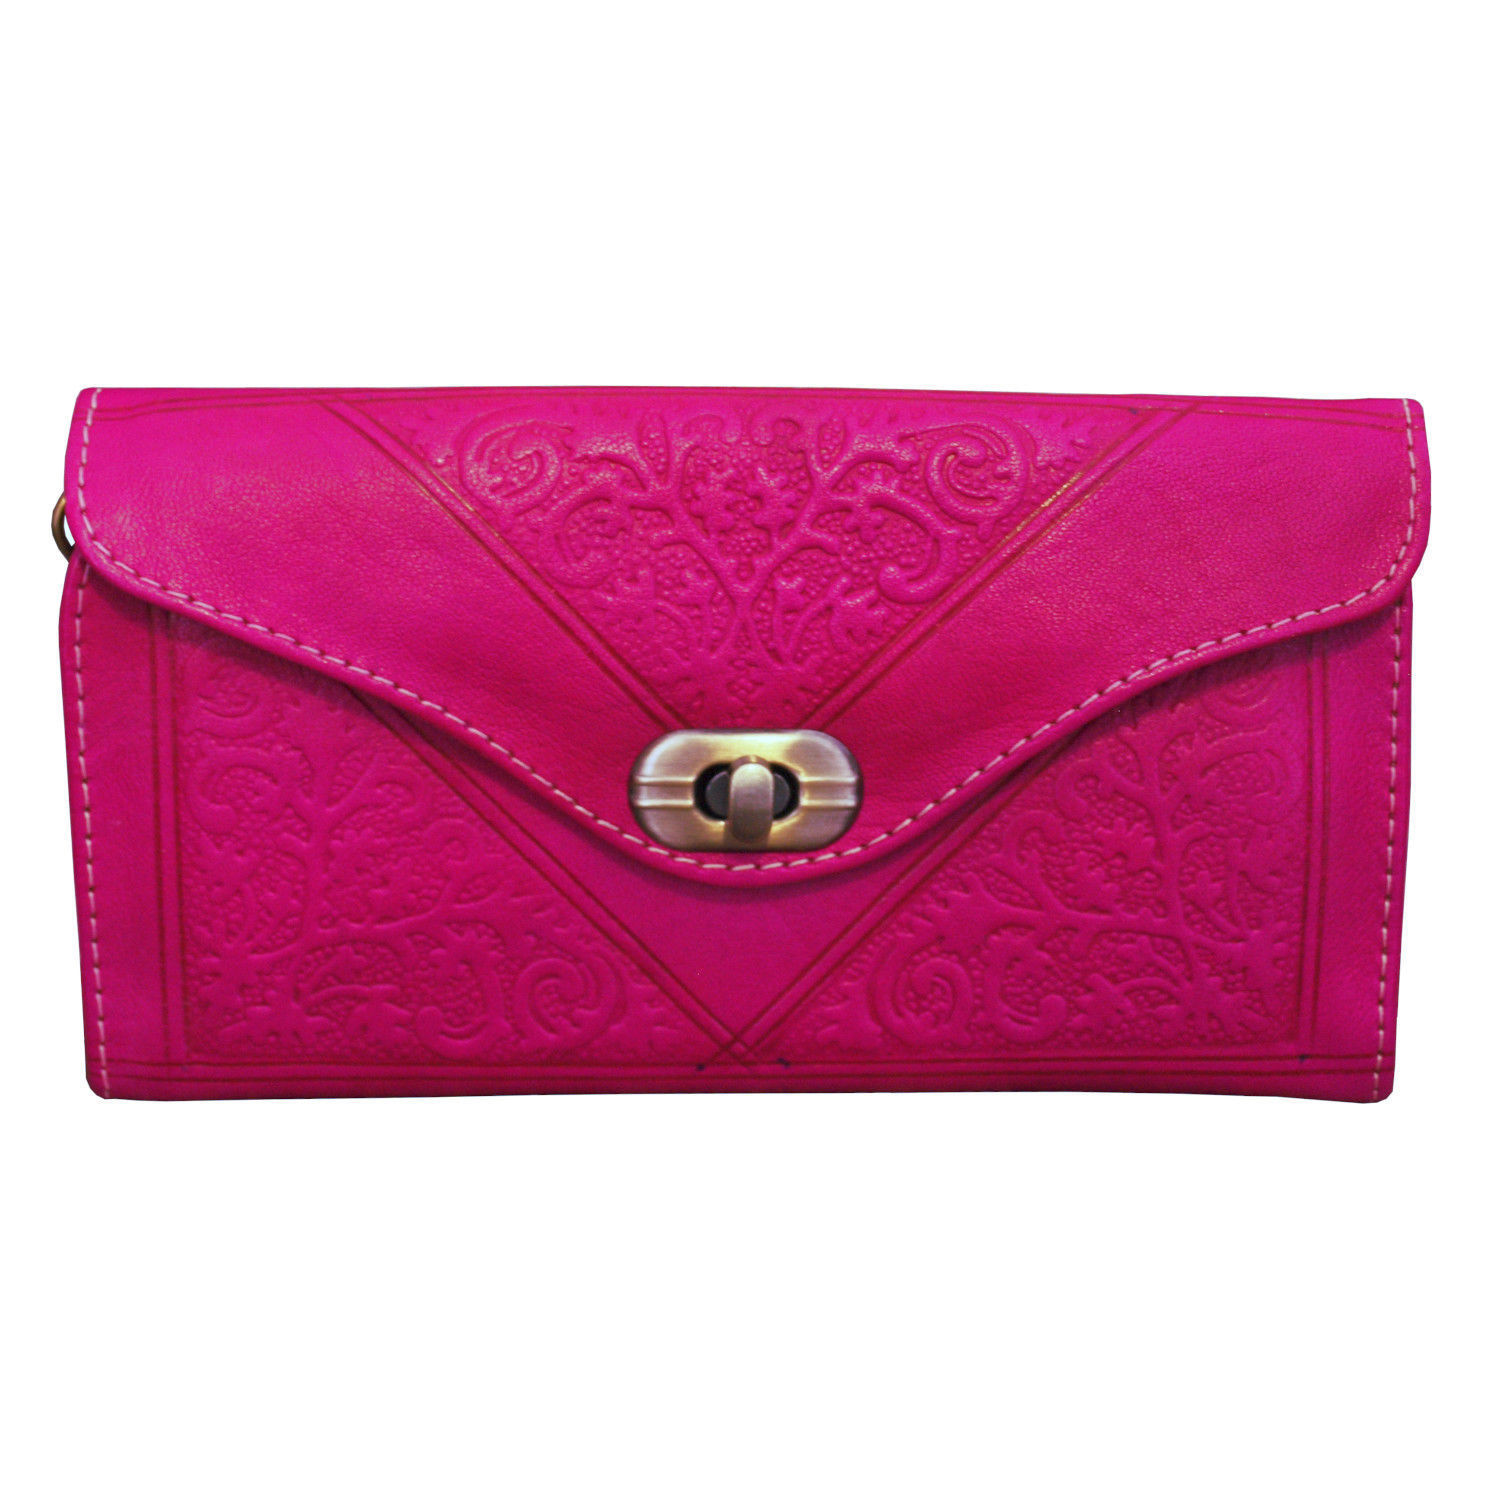 Pink Leather Purse on White Background